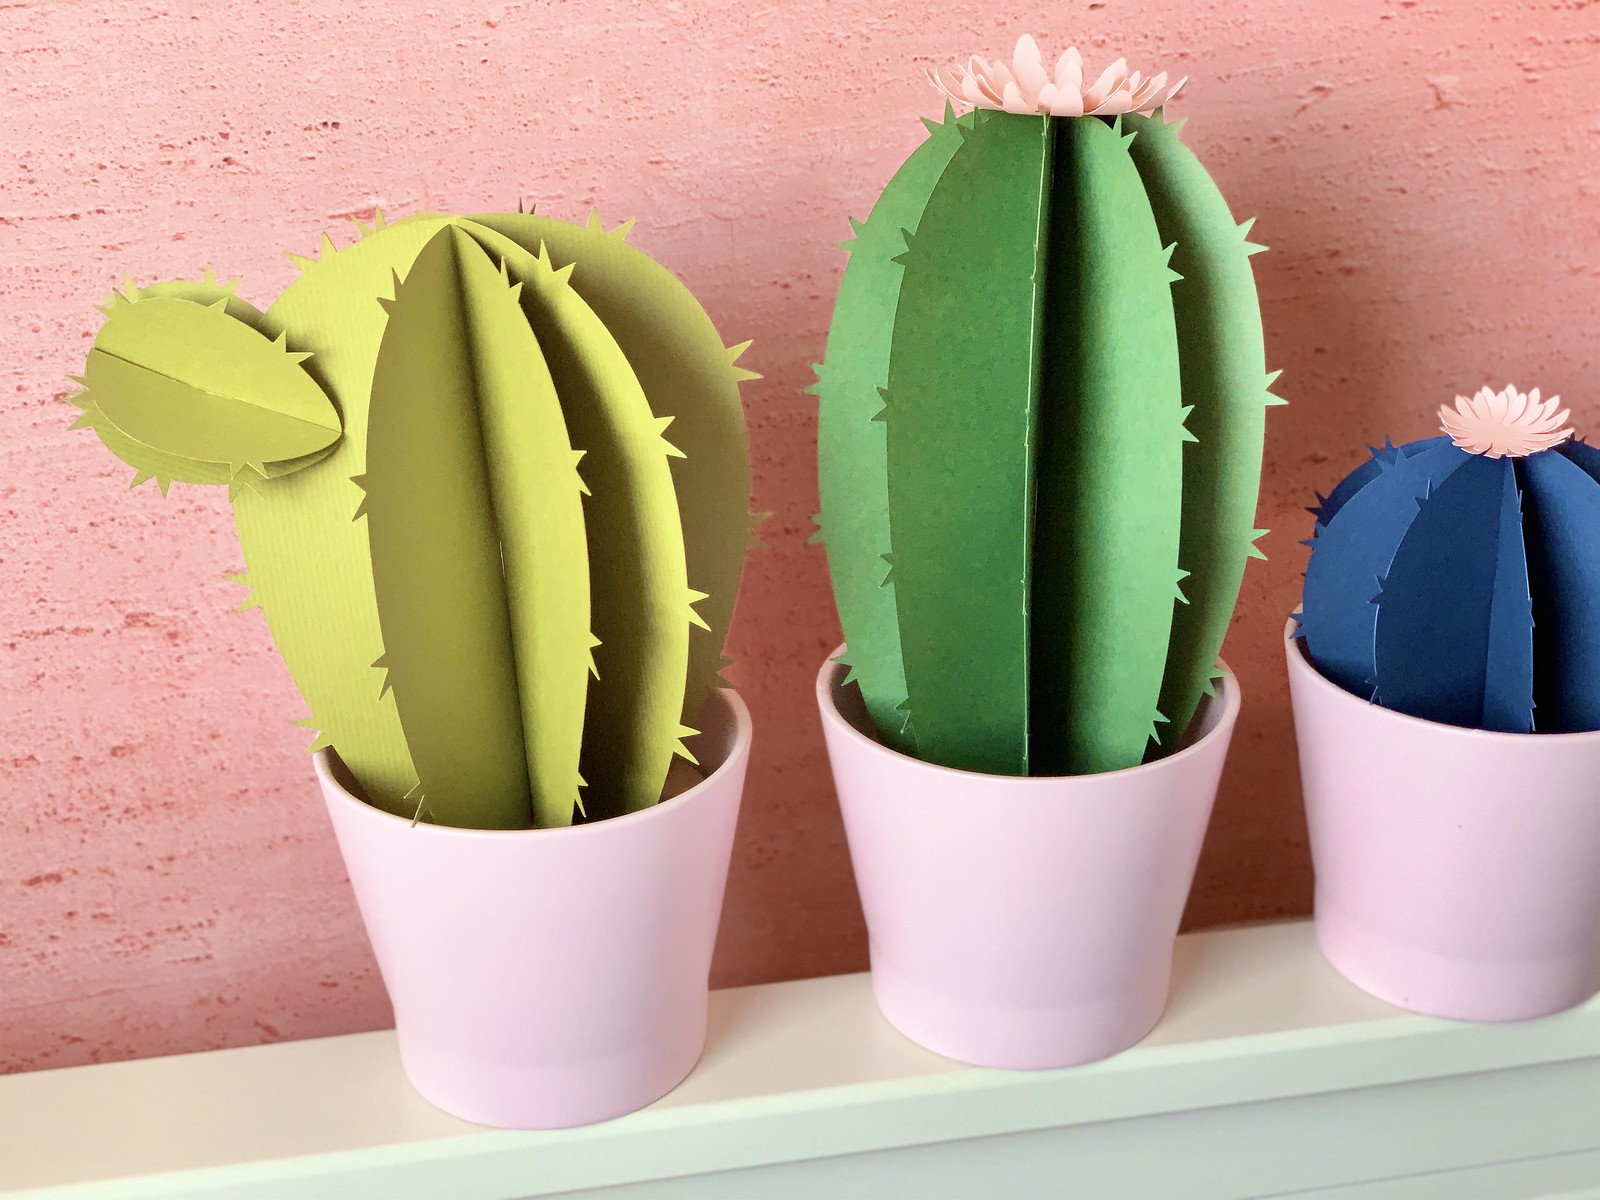 Close up of three paper cactuses. One pale green, one dark green, one dark blue, against a pink wall.